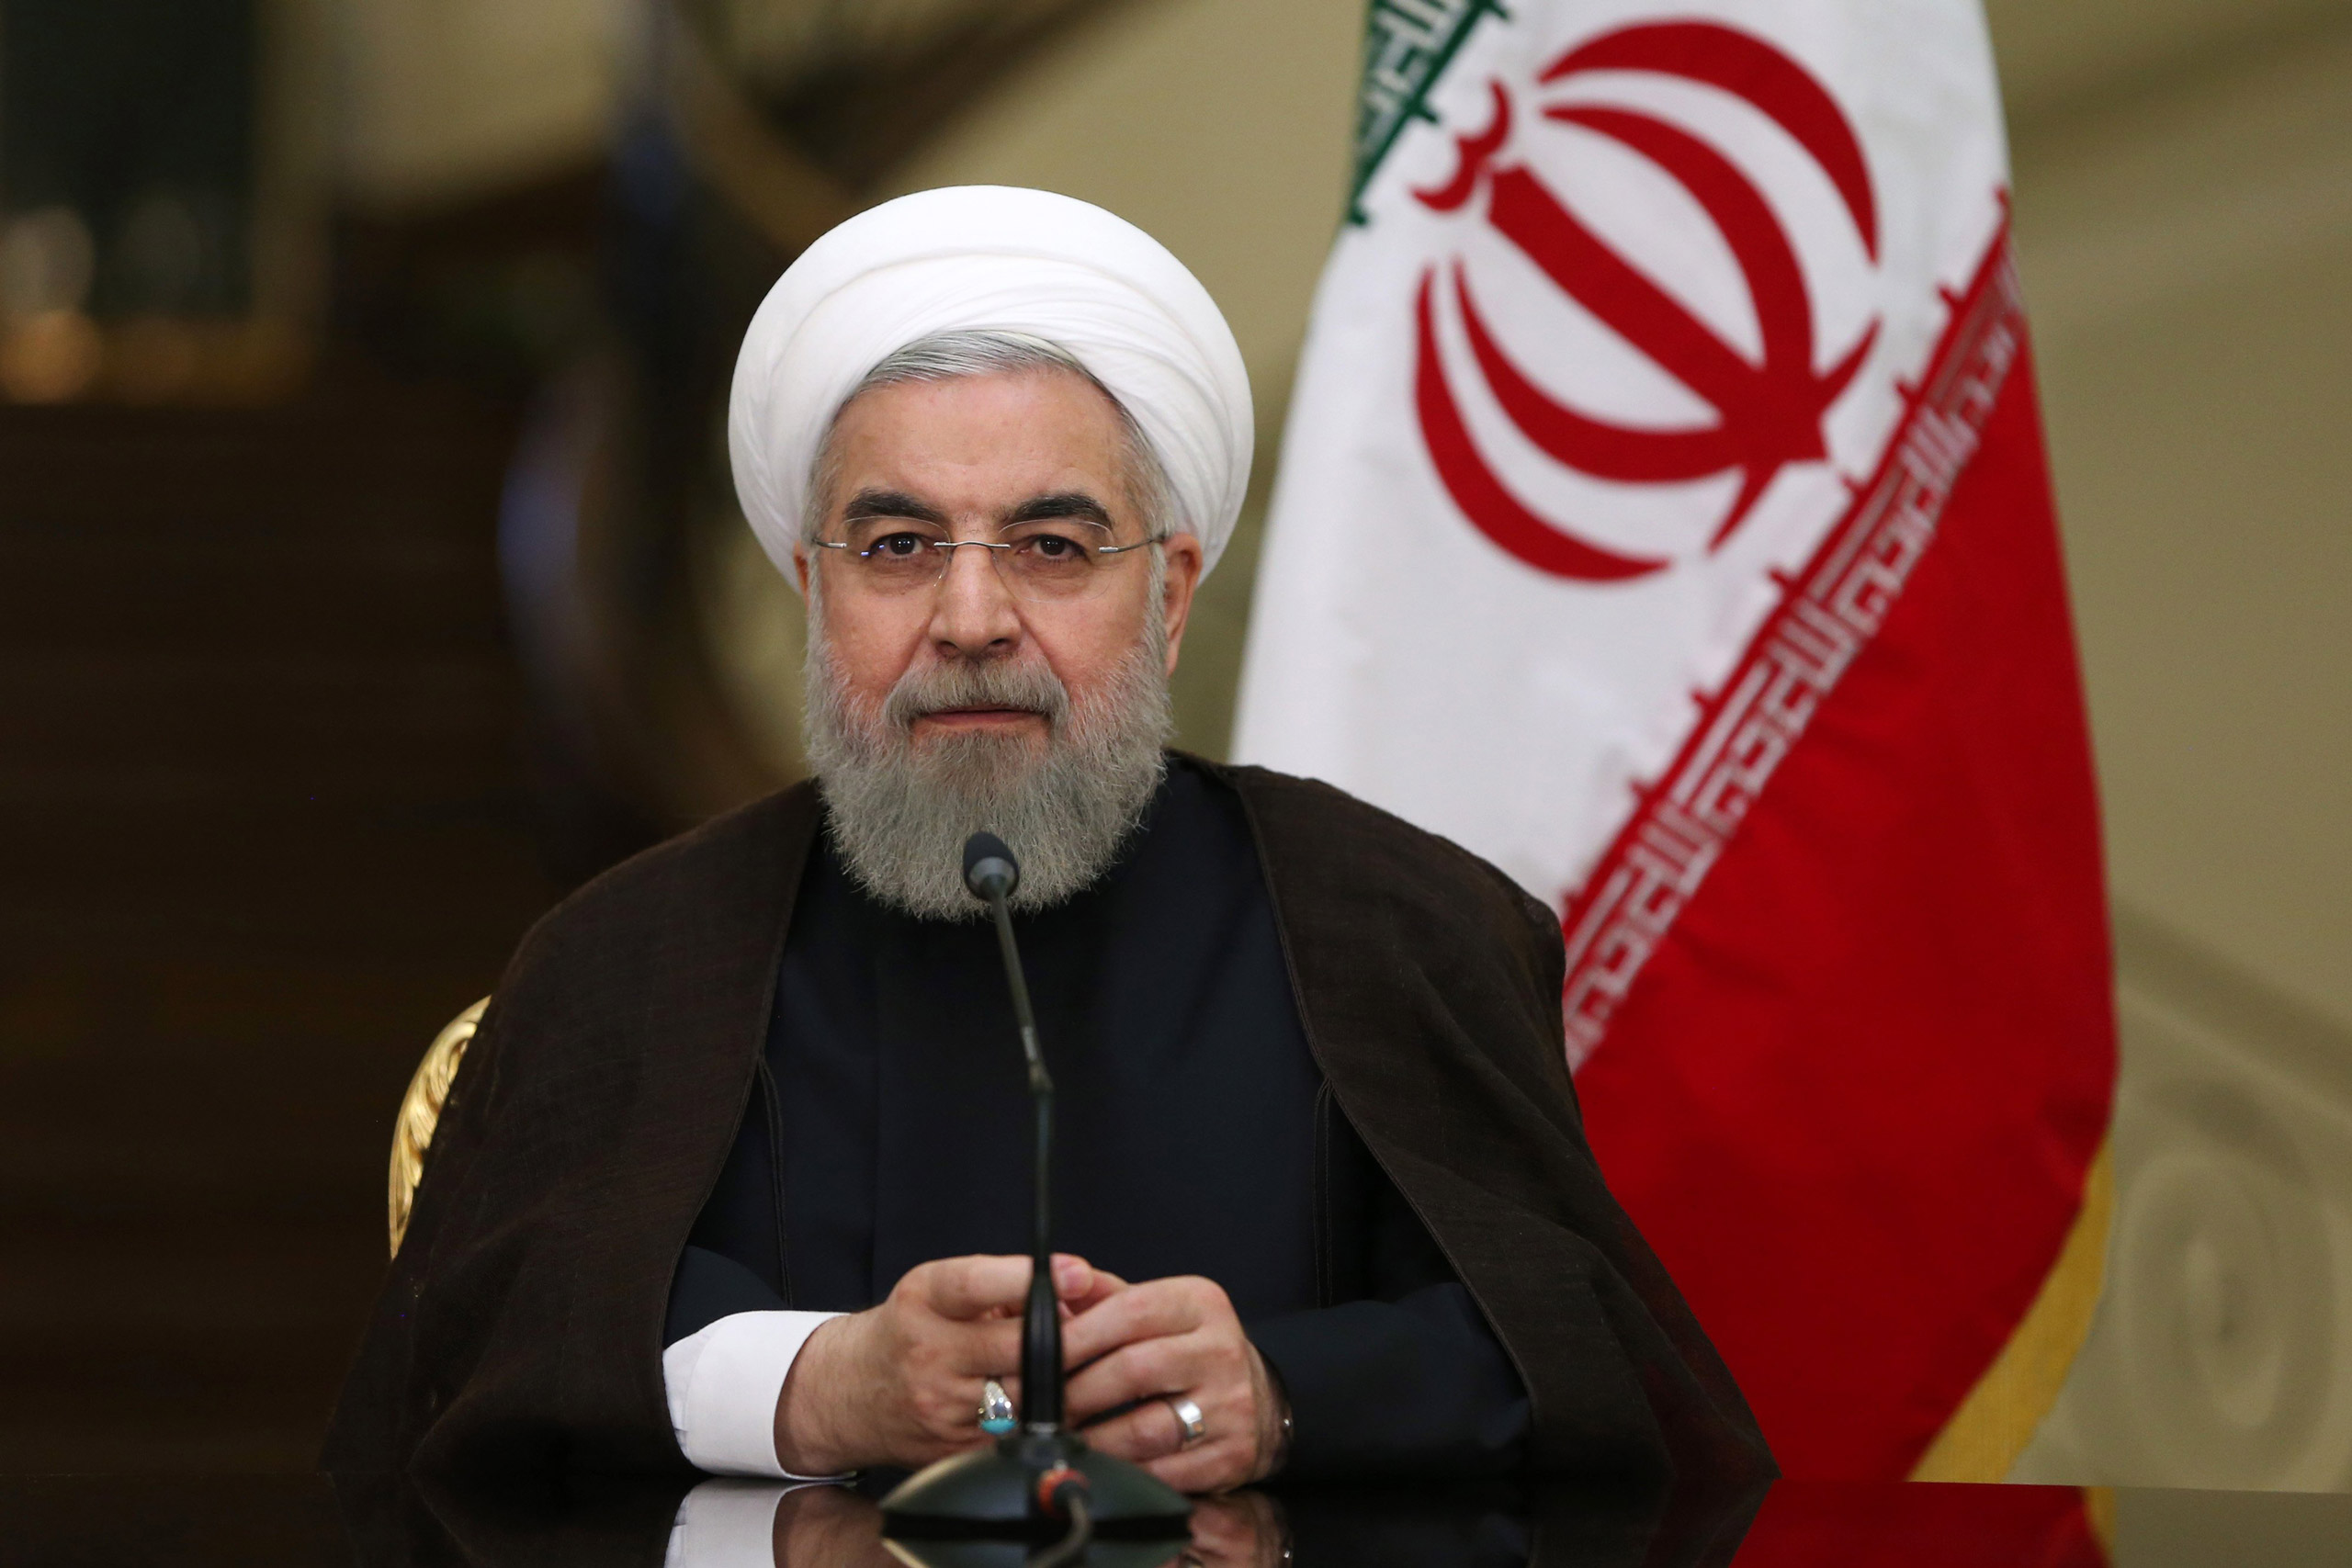 Iranian President Hassan Rouhani speaks with media in a joint press conference with his Austrian counterpart Heinz Fischer in Tehran on Sept. 8, 2015. (Ebrahim Noroozi—AP)